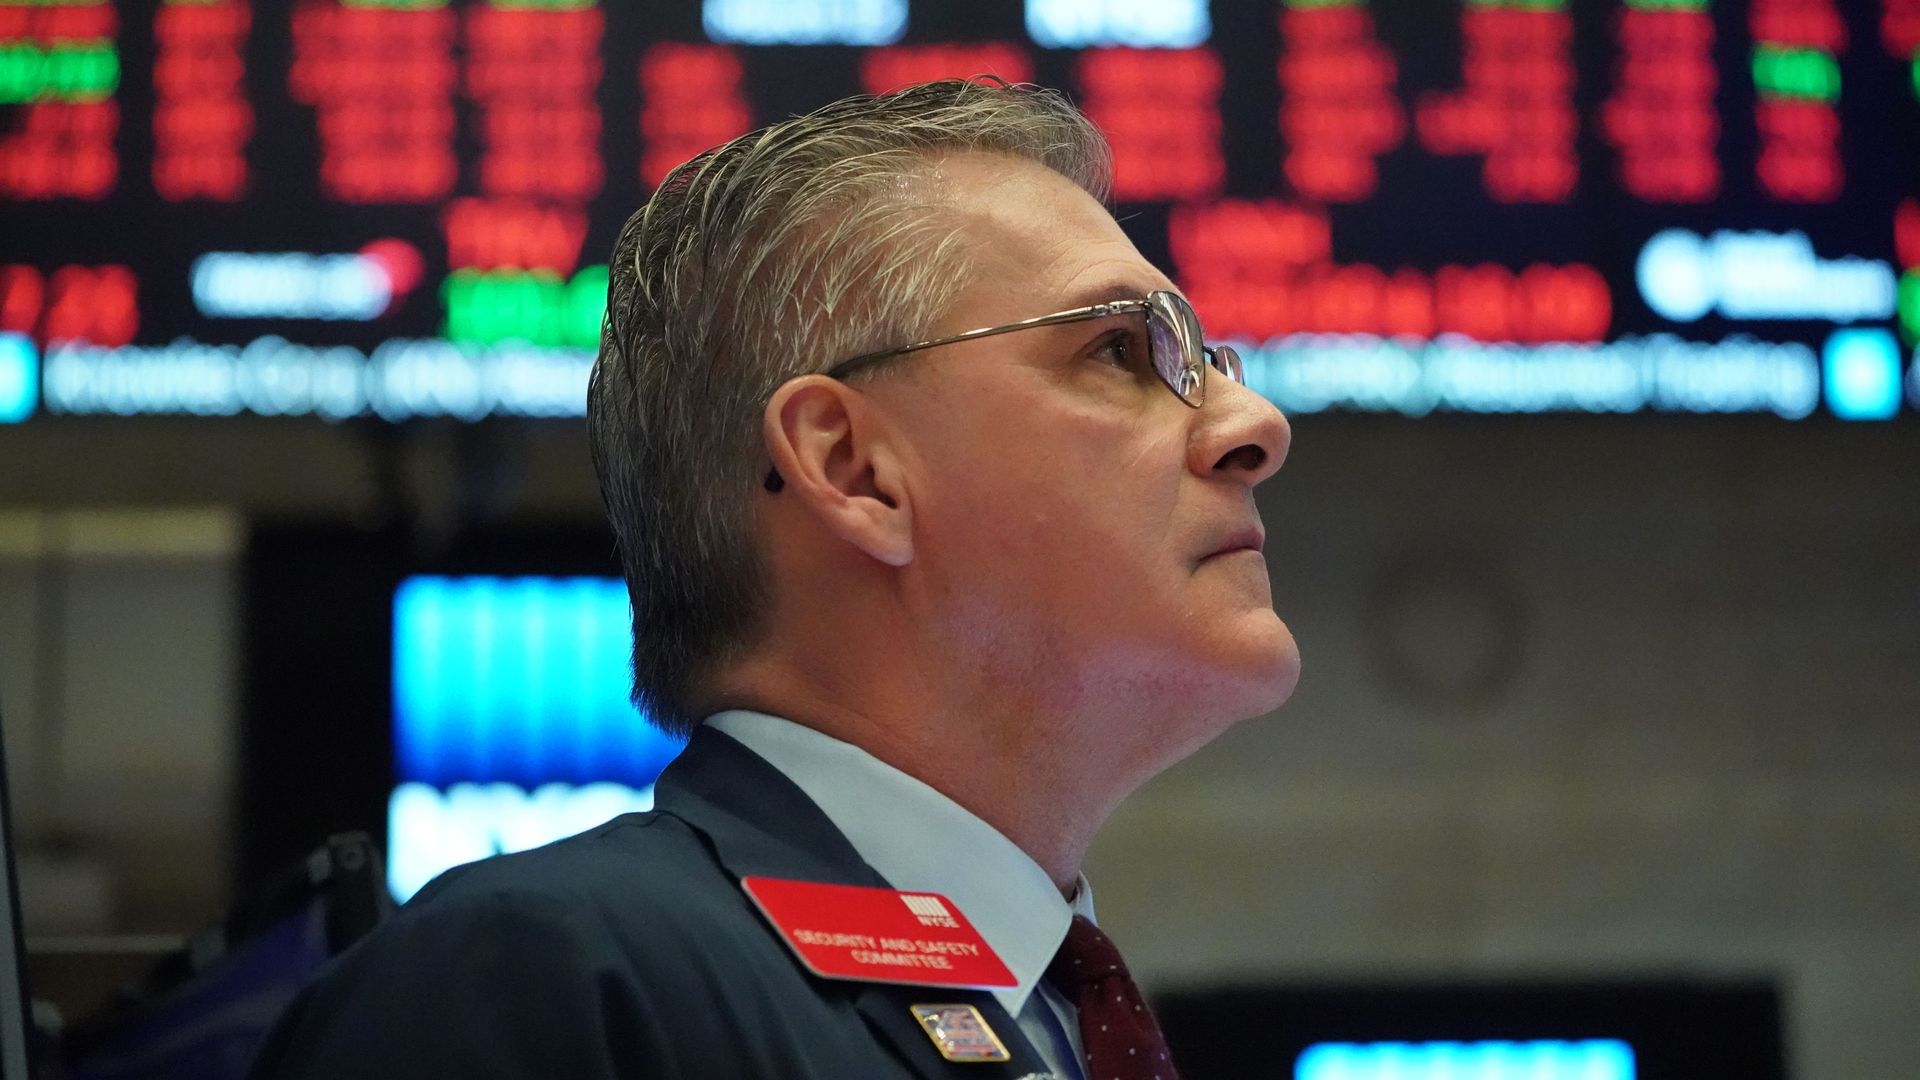 A man in the stock exchange.